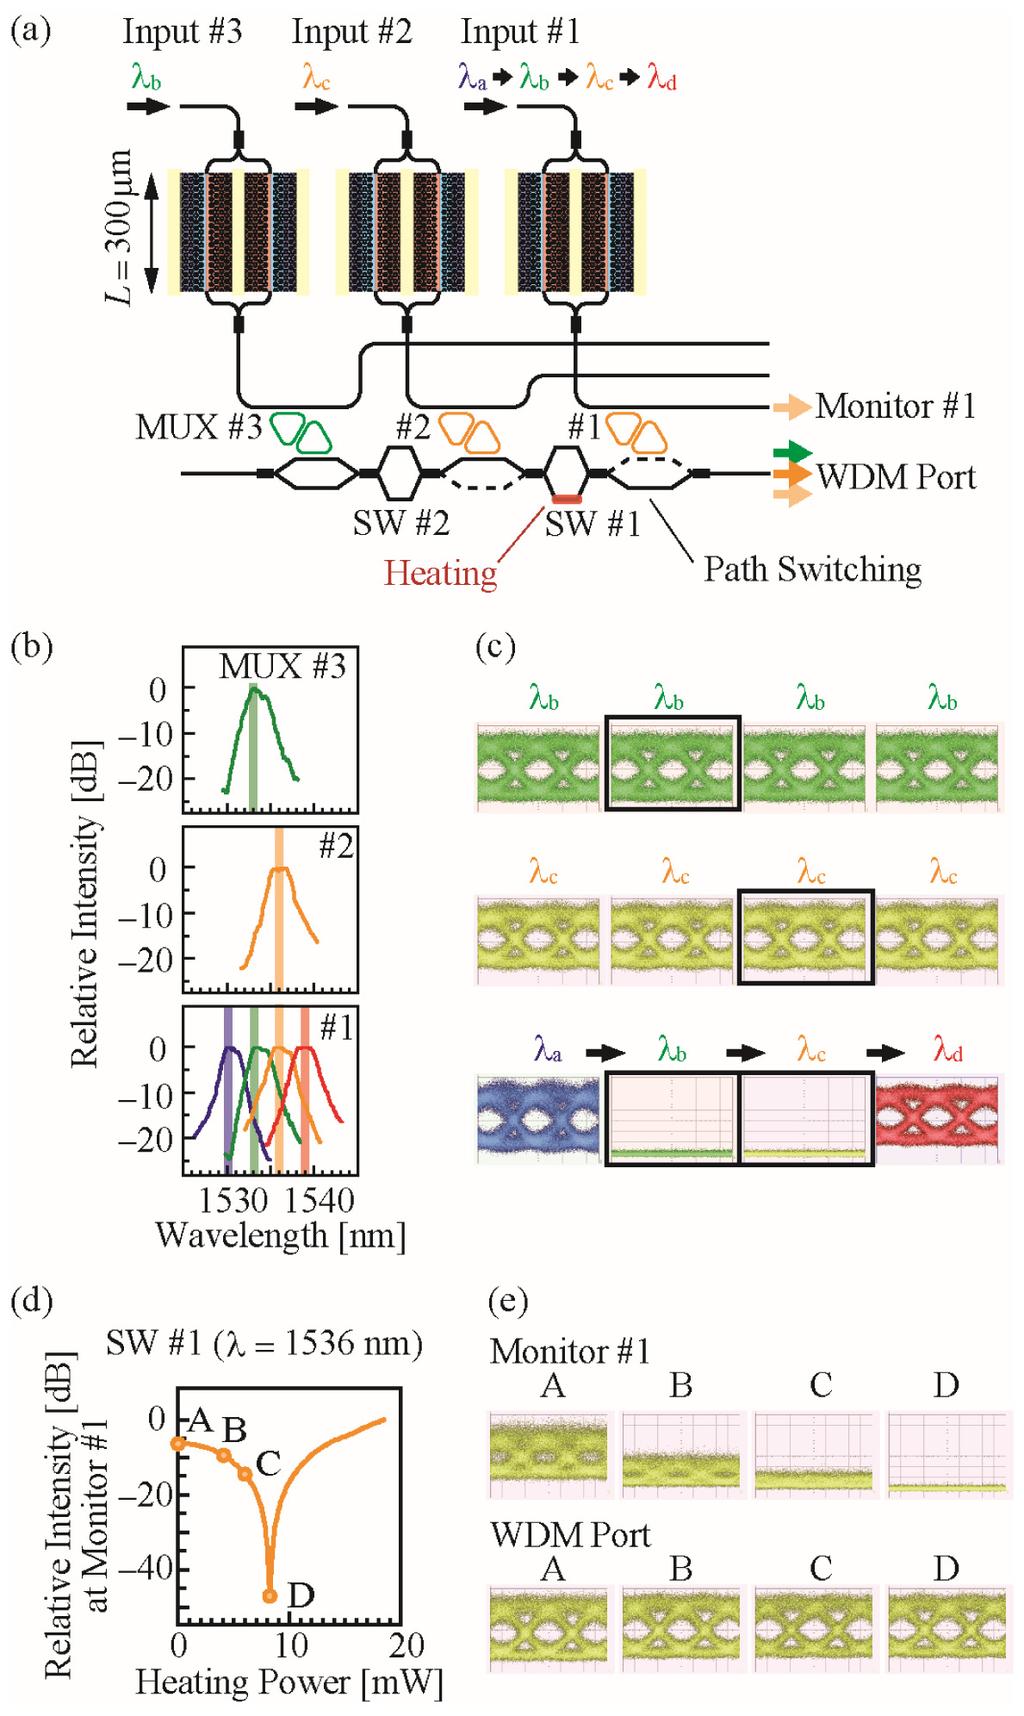 Fig. 6. Hitless wavelength tuning. (a) Schematic operation. (b) Measured MUX spectra and tuning of MUX #1. (c) 25 Gbps eye patterns. (d) Switching characteristics of SW #1.